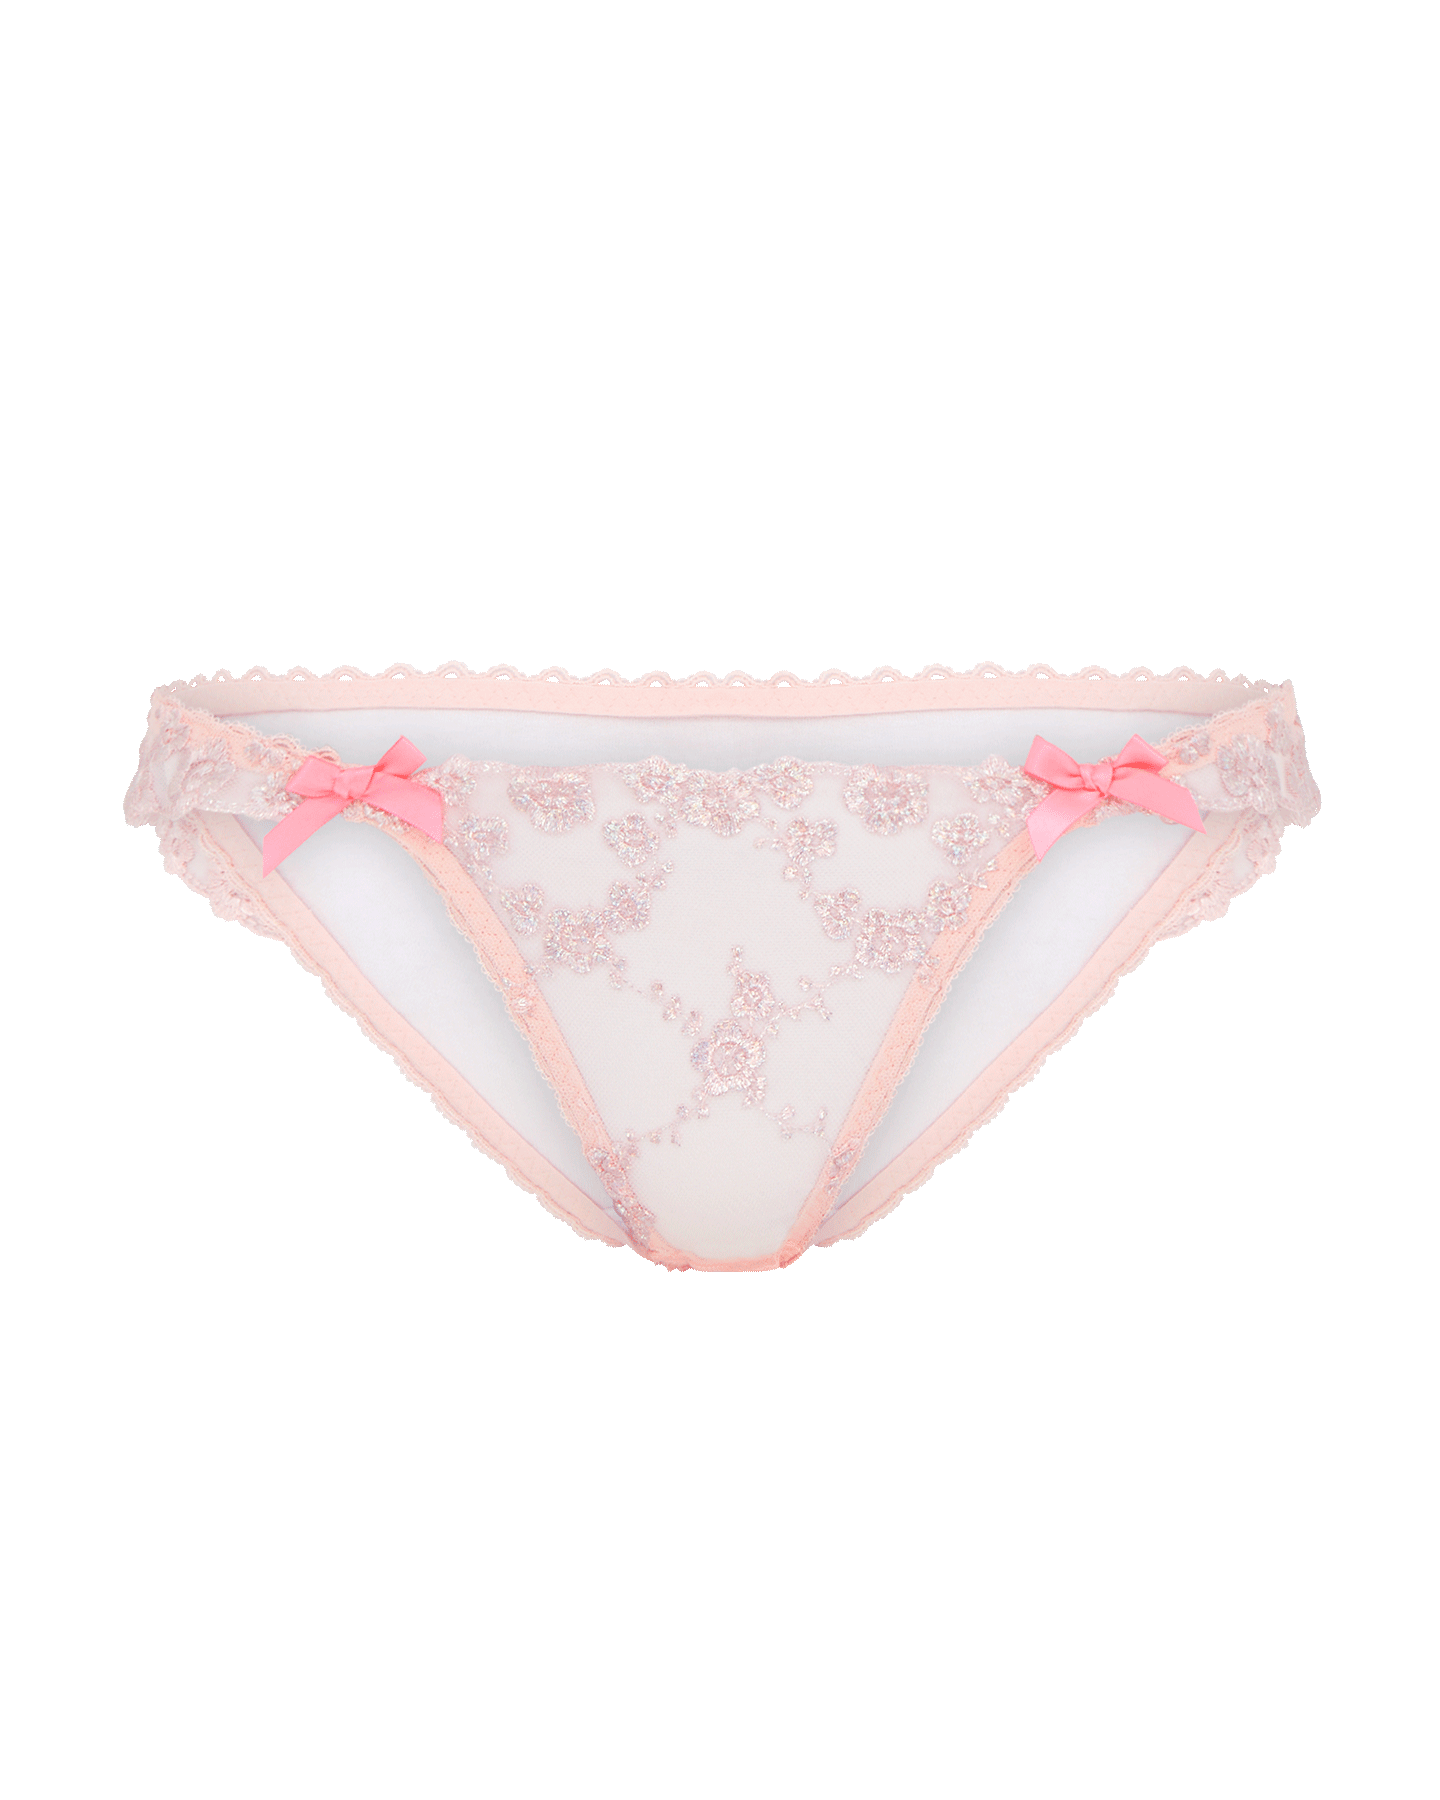 Adelie Full Brief in Baby Pink/Hot Pink | By Agent Provocateur